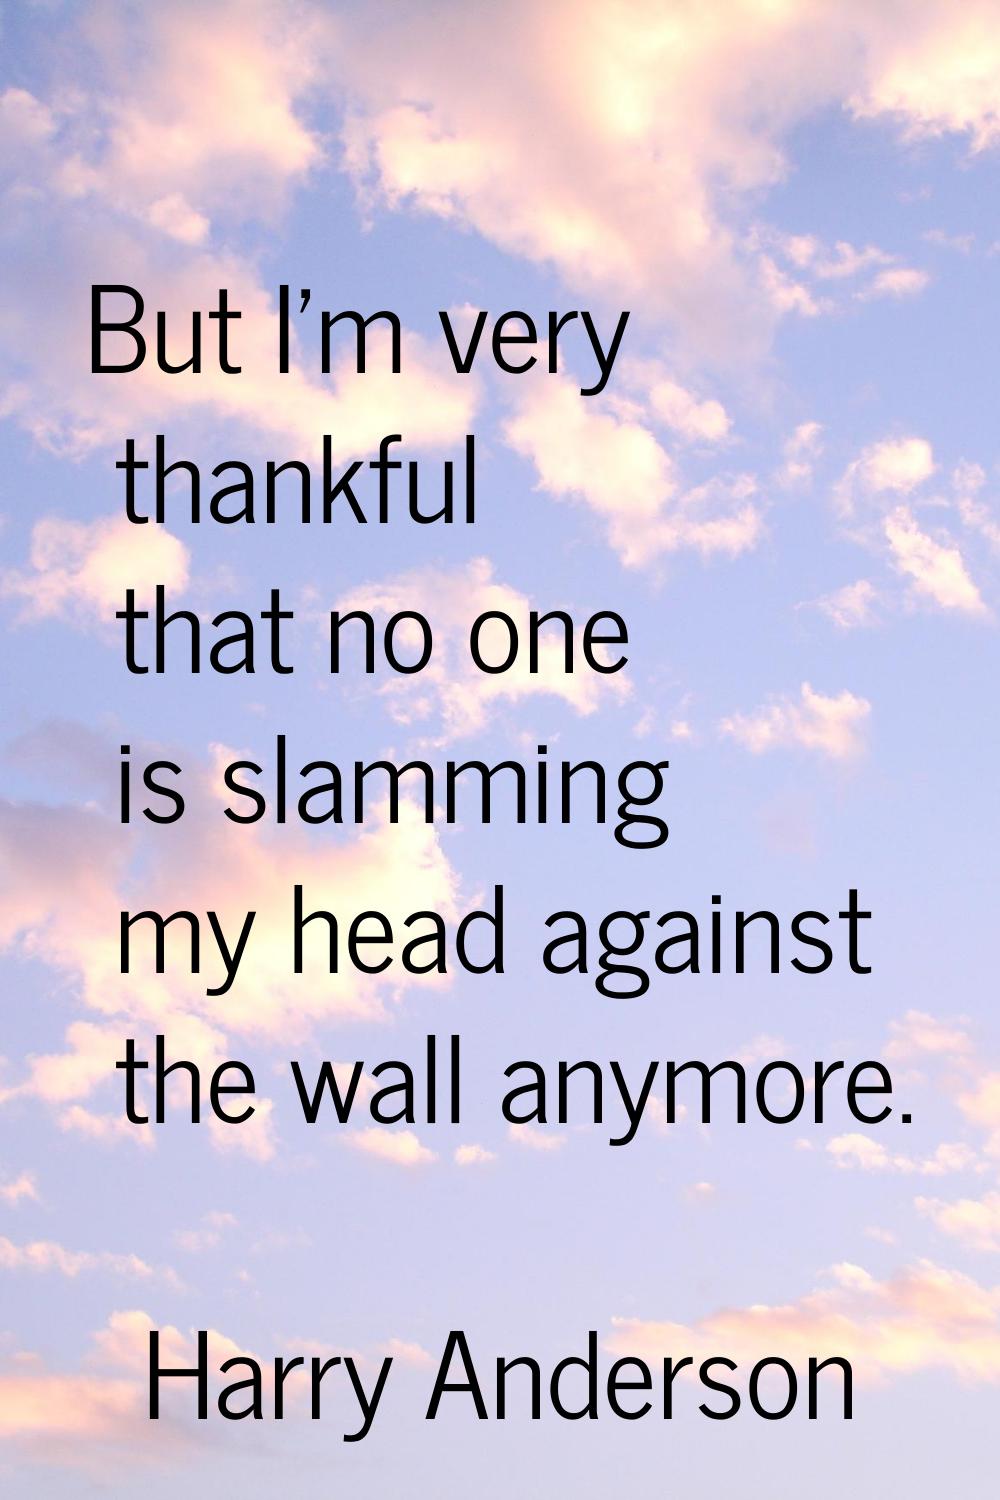 But I'm very thankful that no one is slamming my head against the wall anymore.